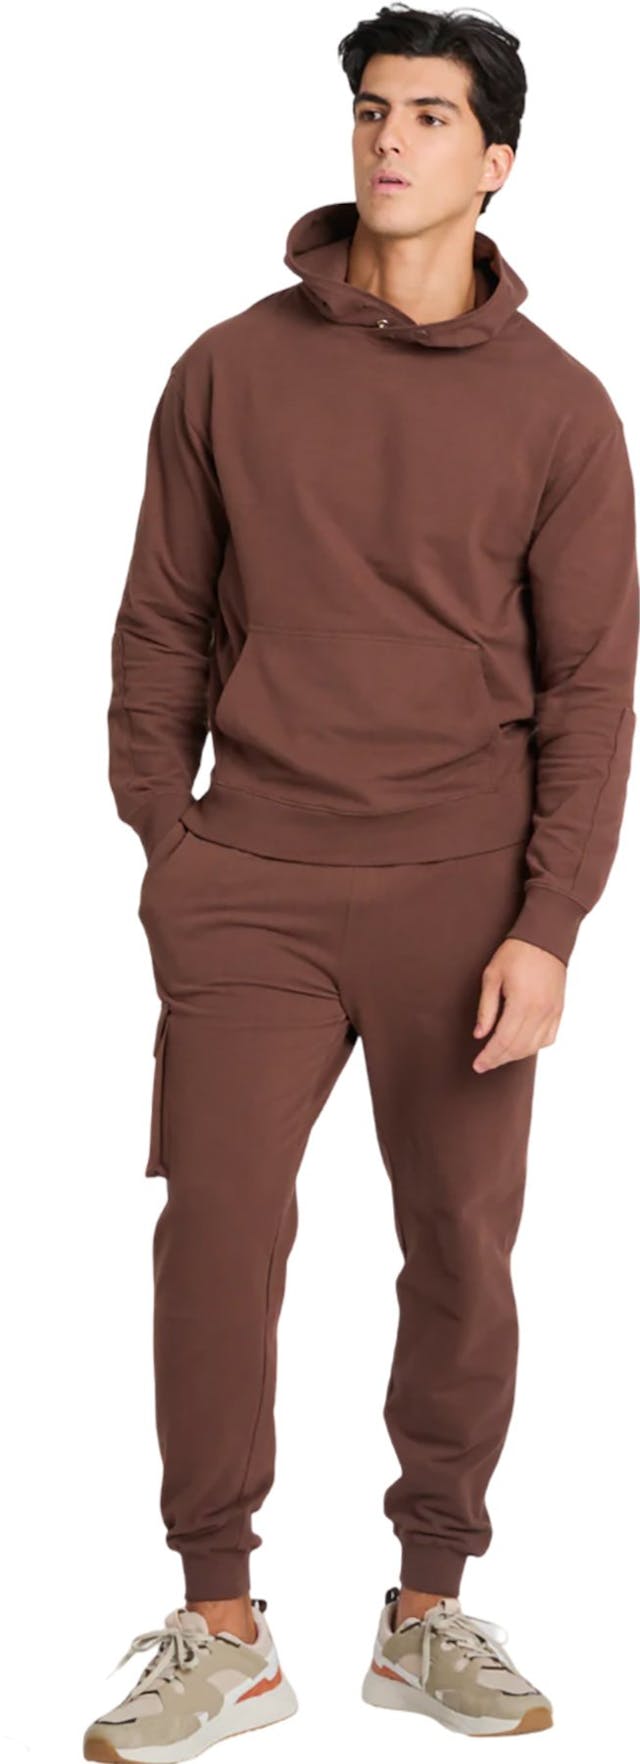 Product image for Organic Comfort Jogger - Men's